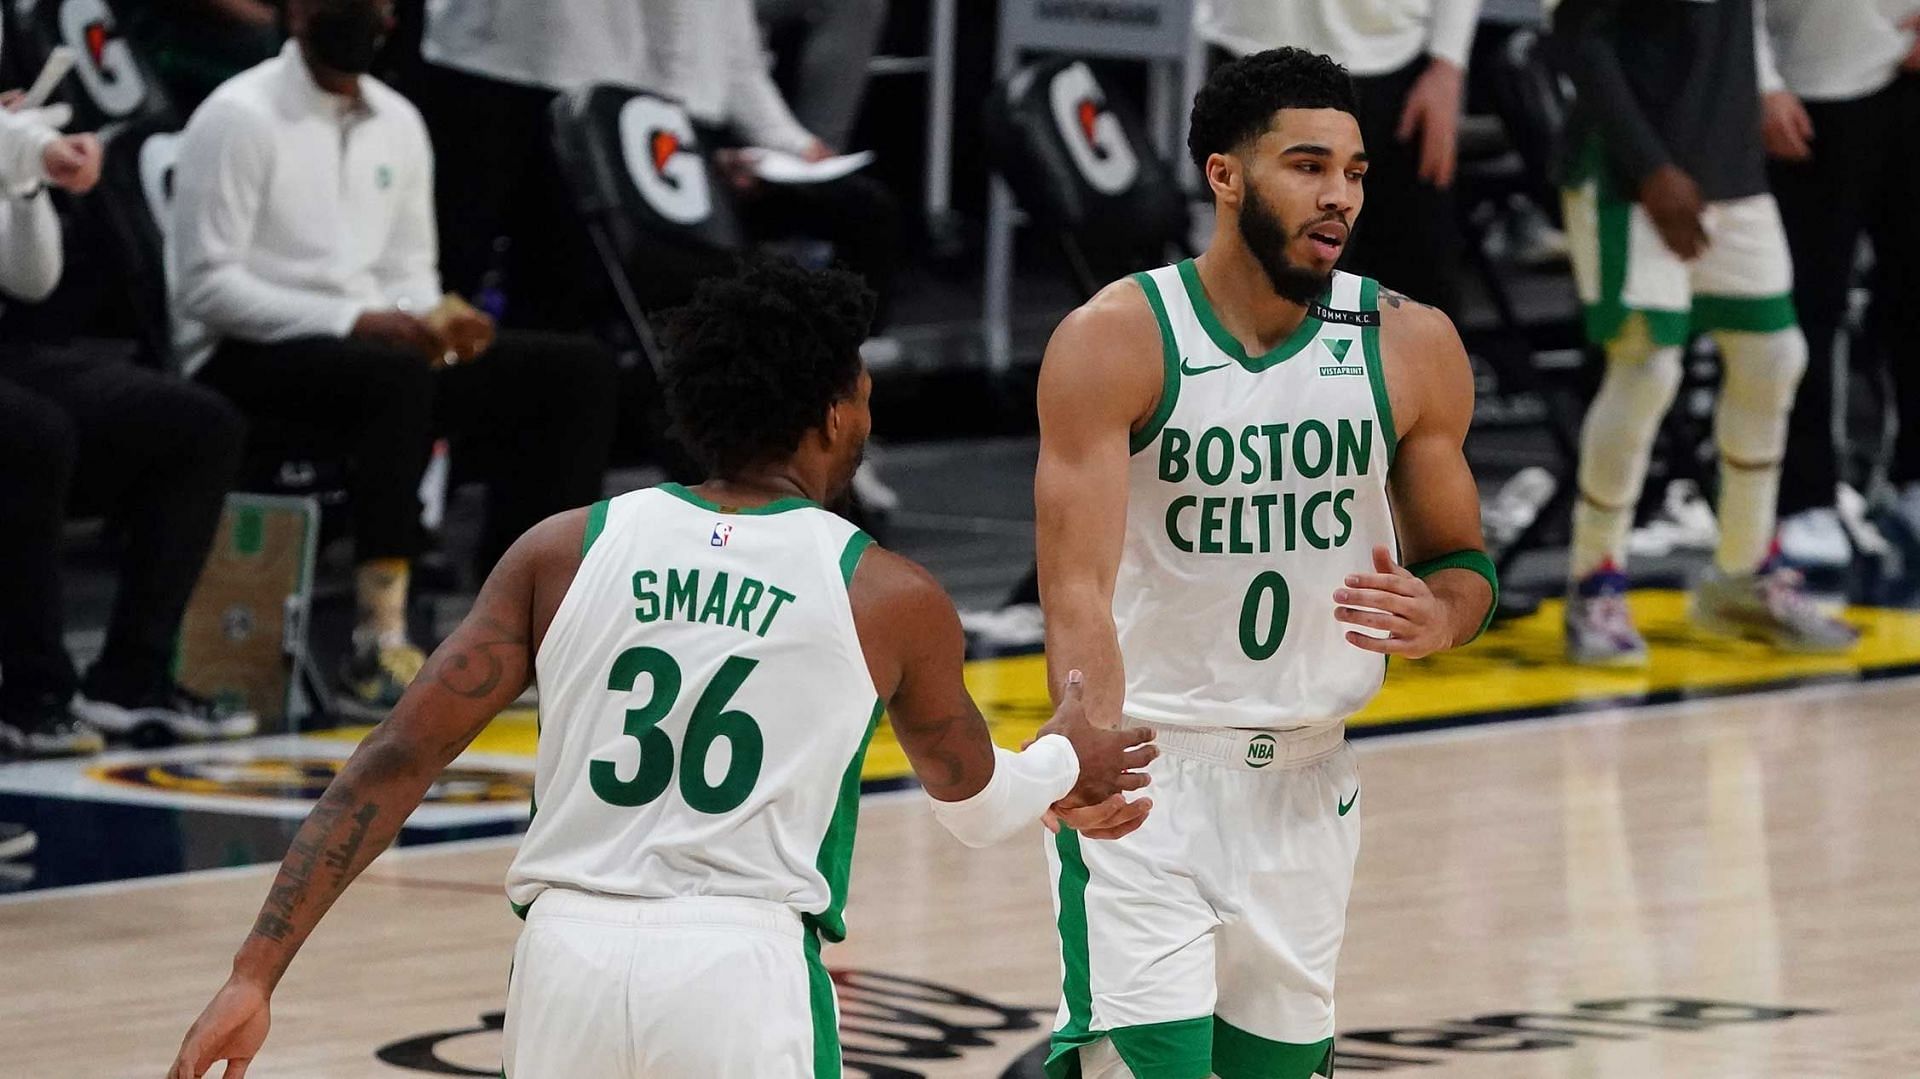 Marcus Smart and Jayson Tatum of the Boston Celtics will lead the charge against the New York Knicks. [Photo: NBC Sports]